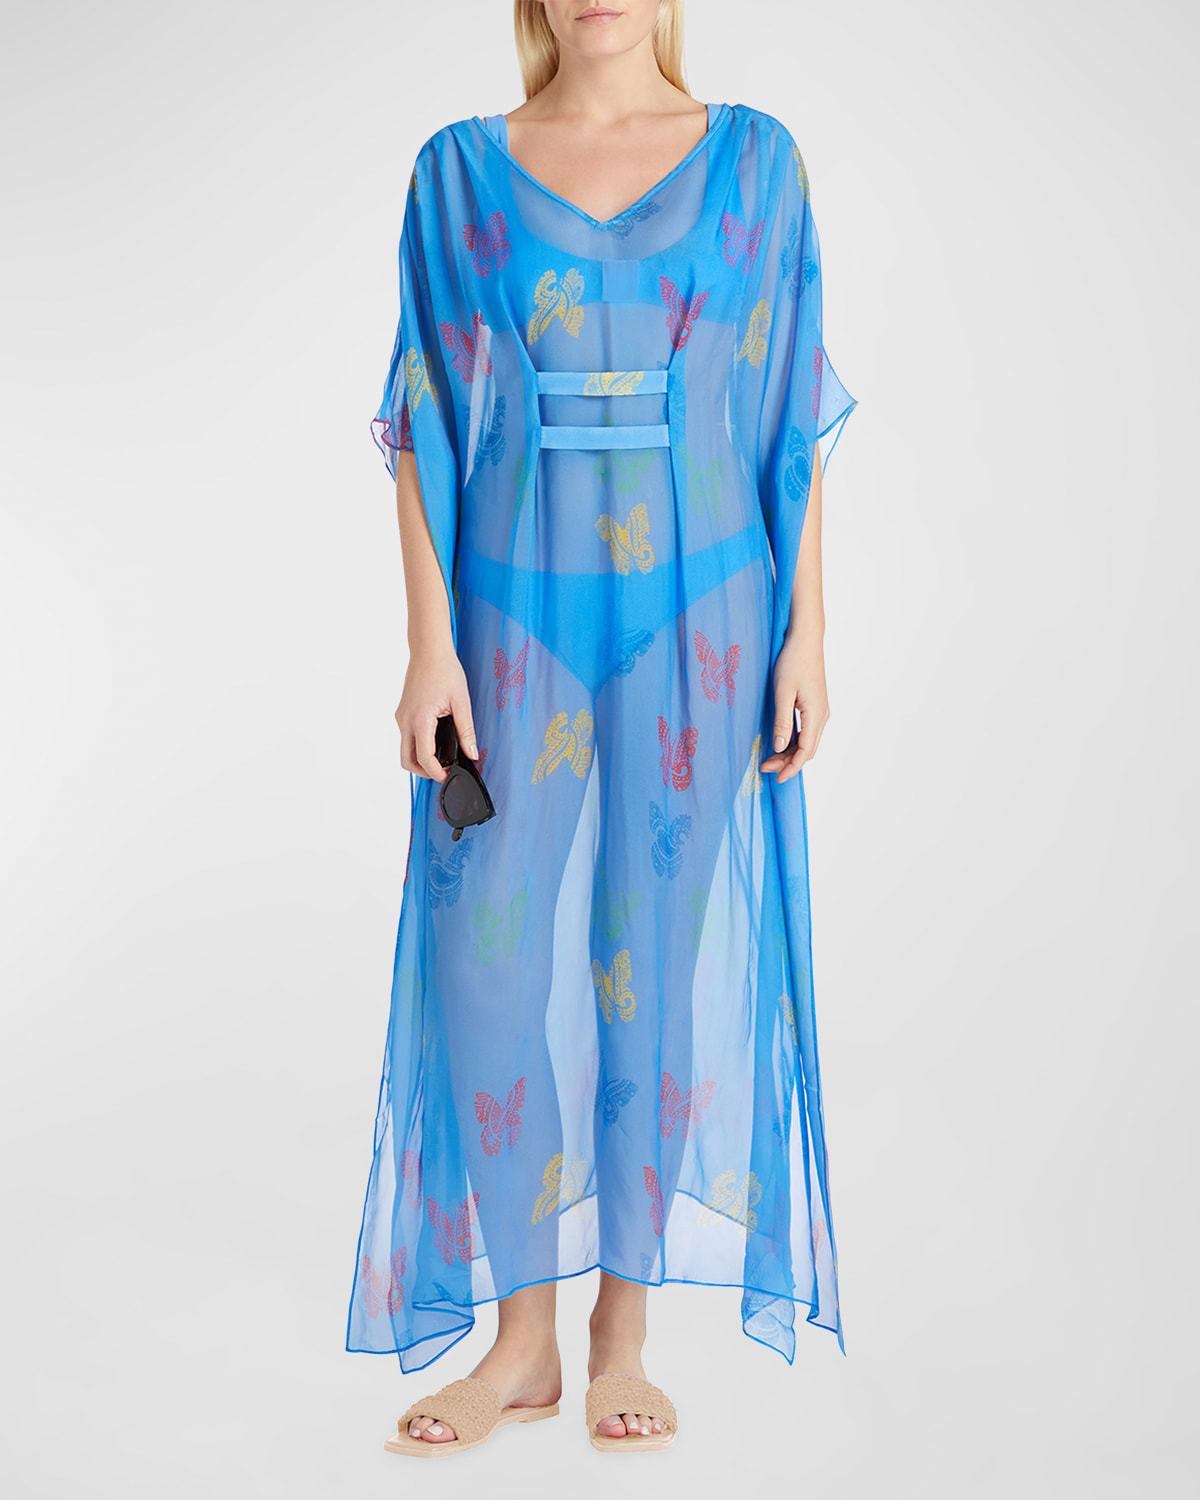 Florence Sheer Butterfly Caftan Coverup